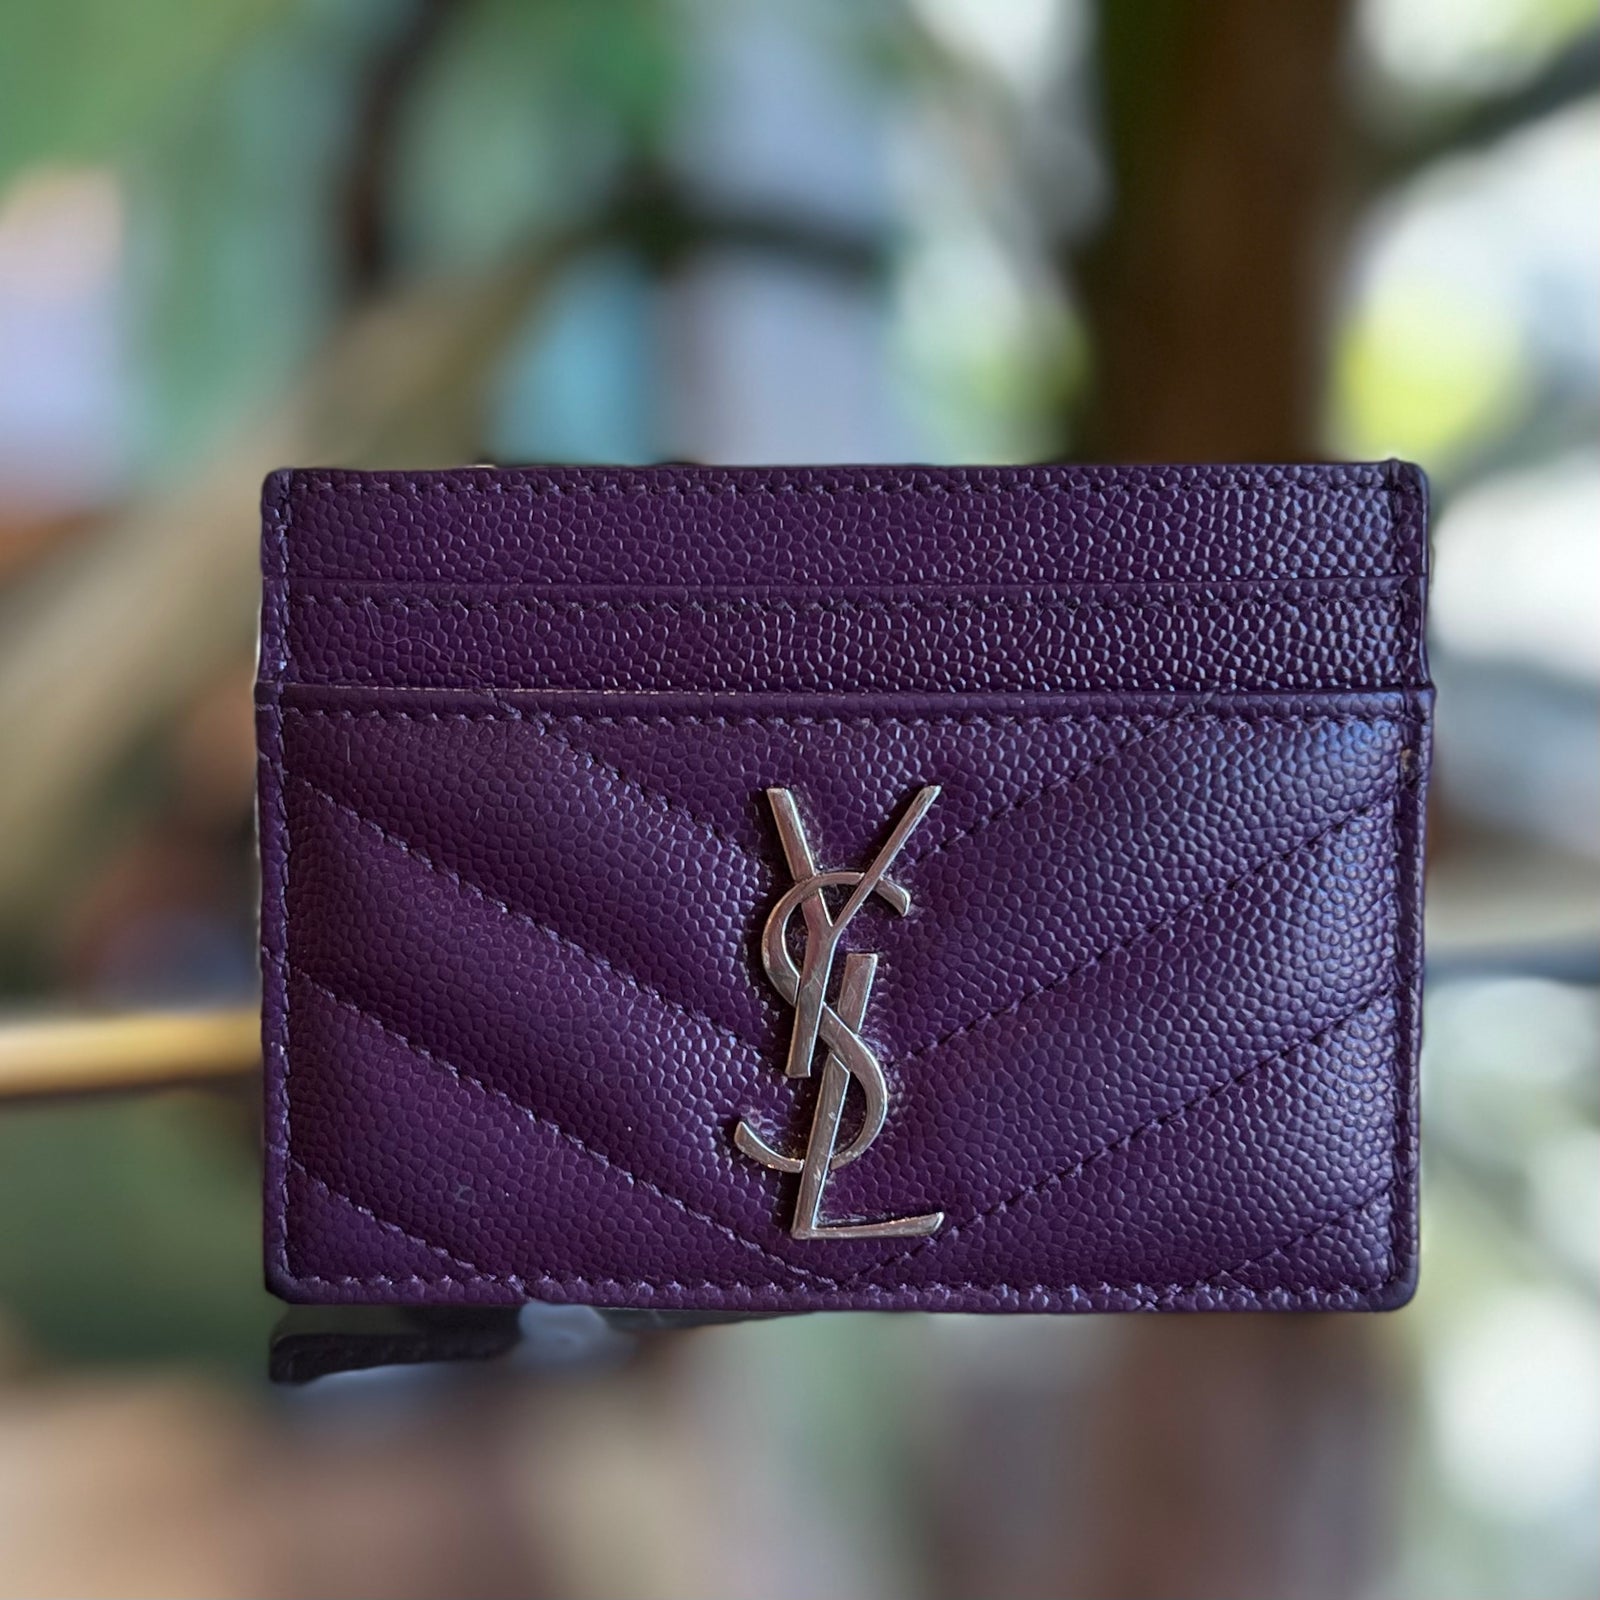 Yves Saint Laurent, Bags, New Authentic Ysl Loulou Toy Calfskin Vflap  Crossbody